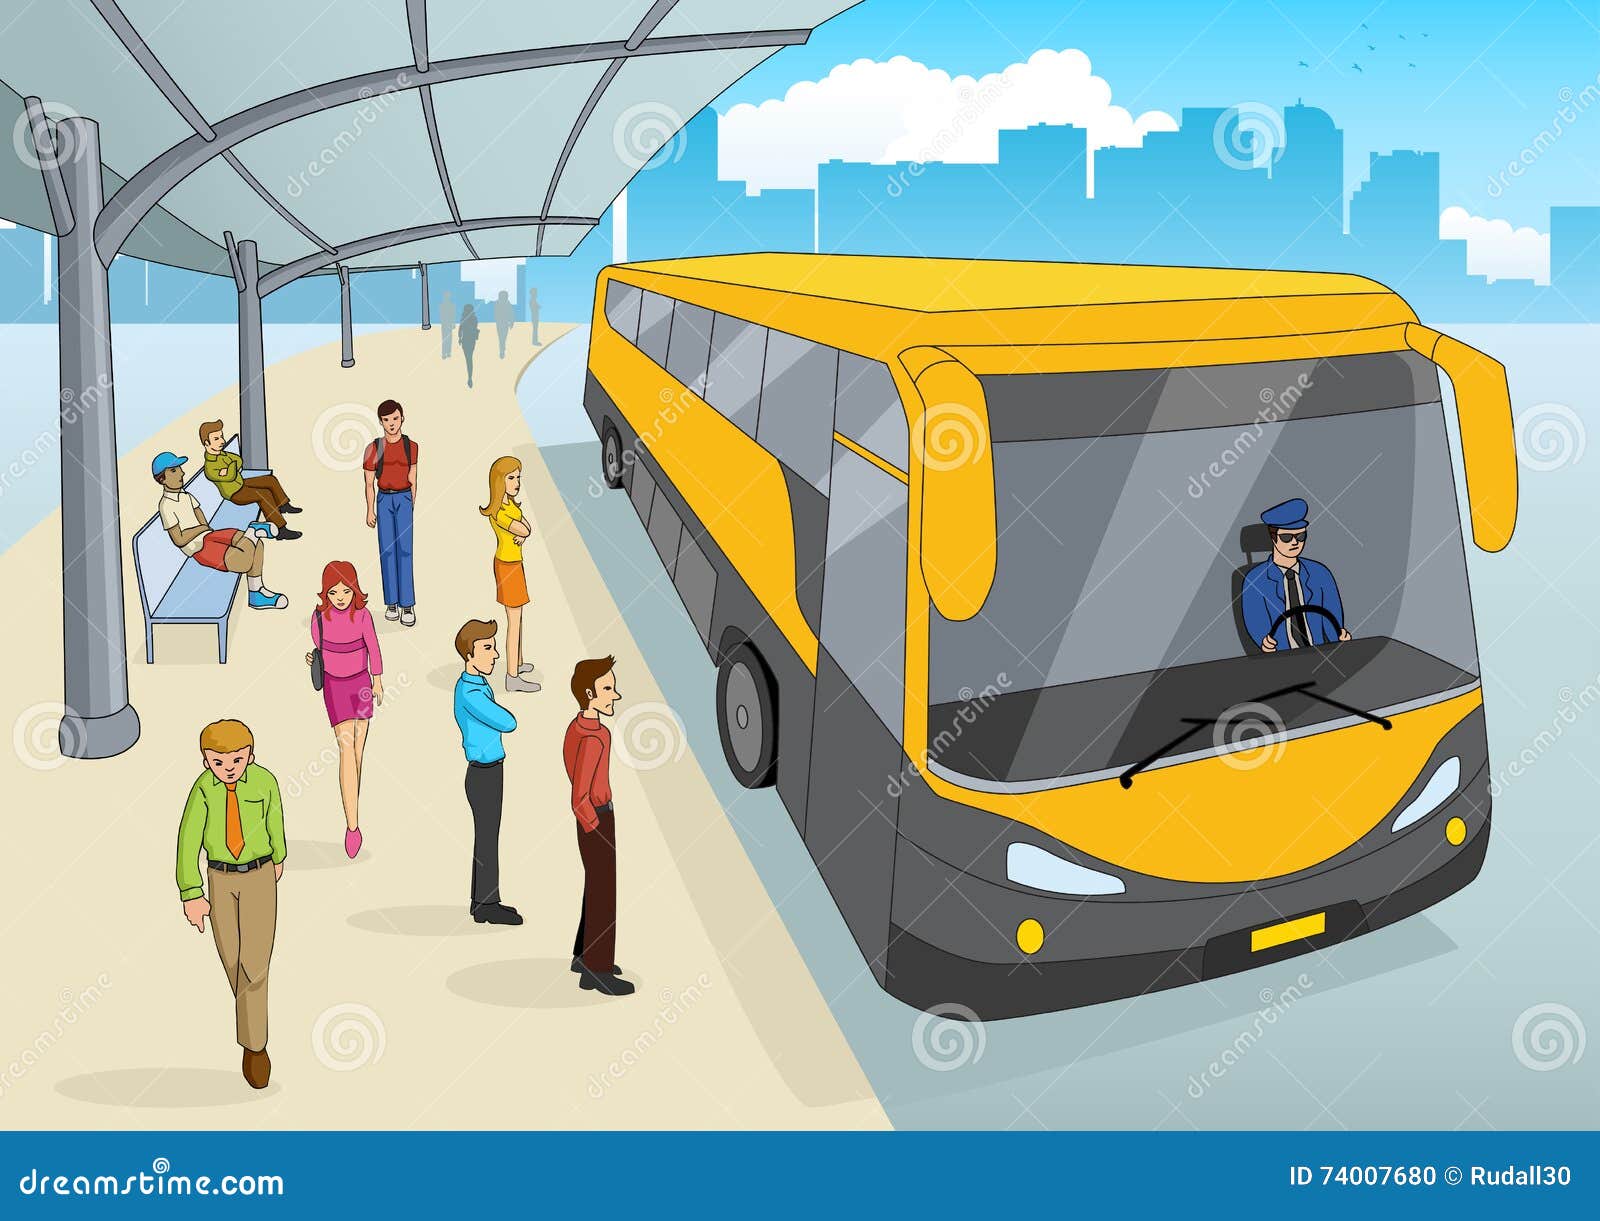 People At Bus Station Stock Vector. Illustration Of People - 74007680